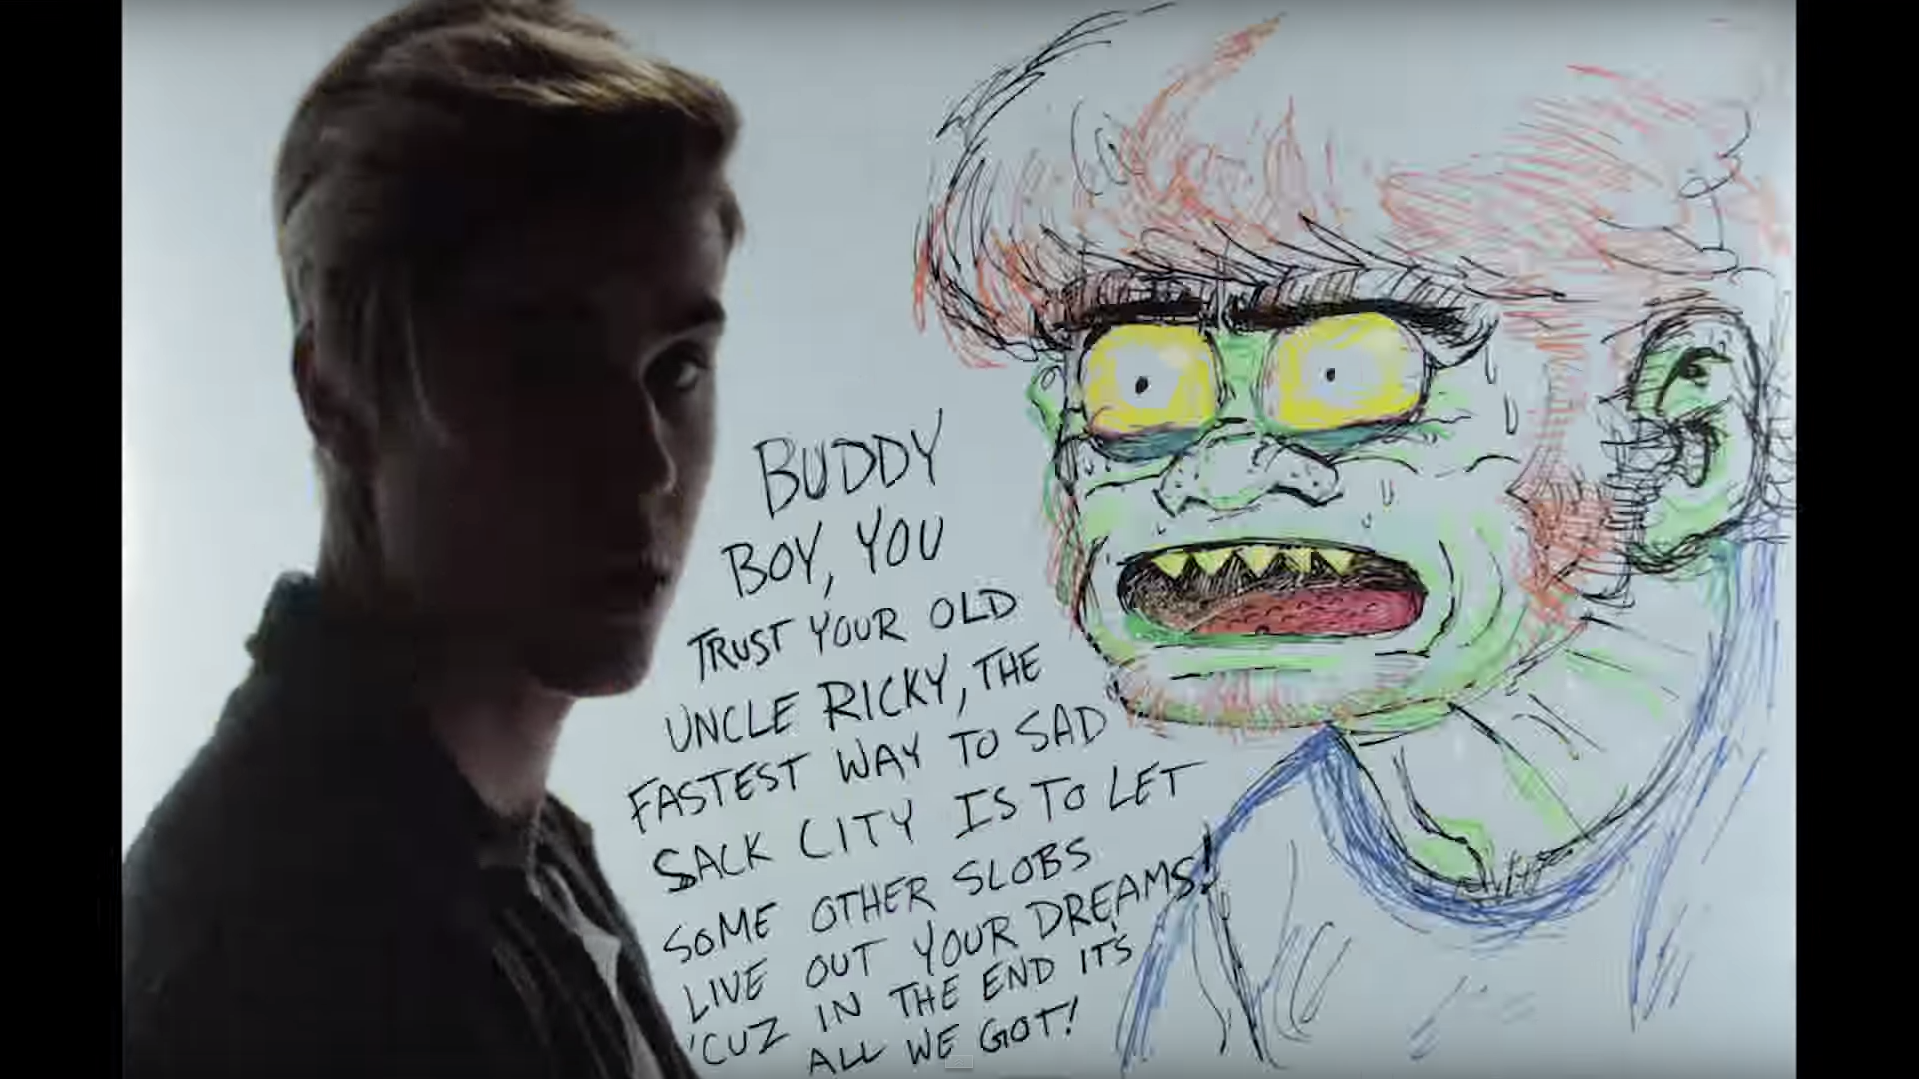 frames from the coolest justin bieber video ever - where are you now